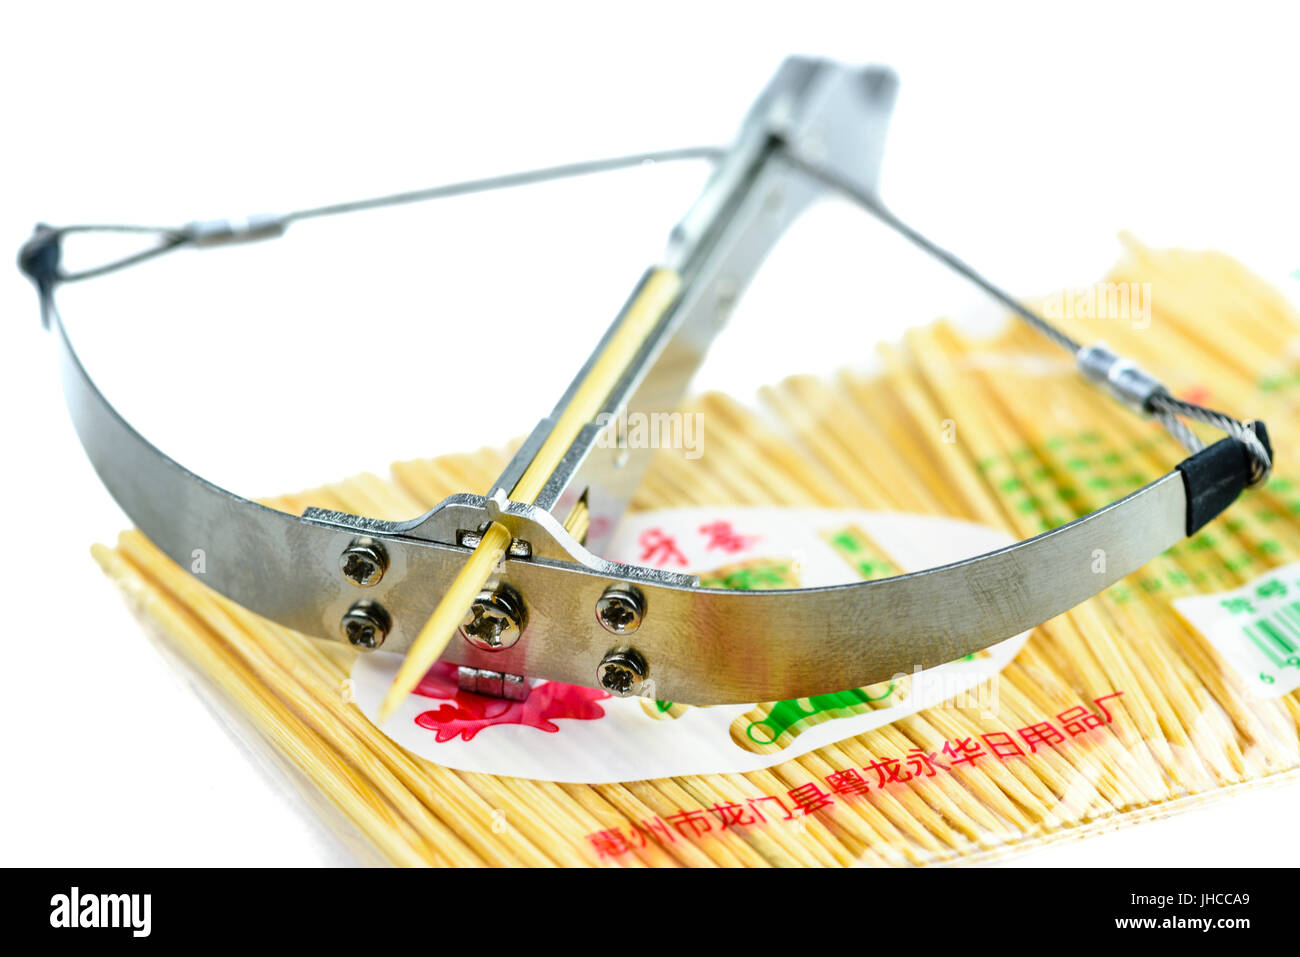 Toothpick catapult, a dangerous steel 'toy' from China which fires toothpicks with enough force to break skin and embed the projectile in an apple. Stock Photo